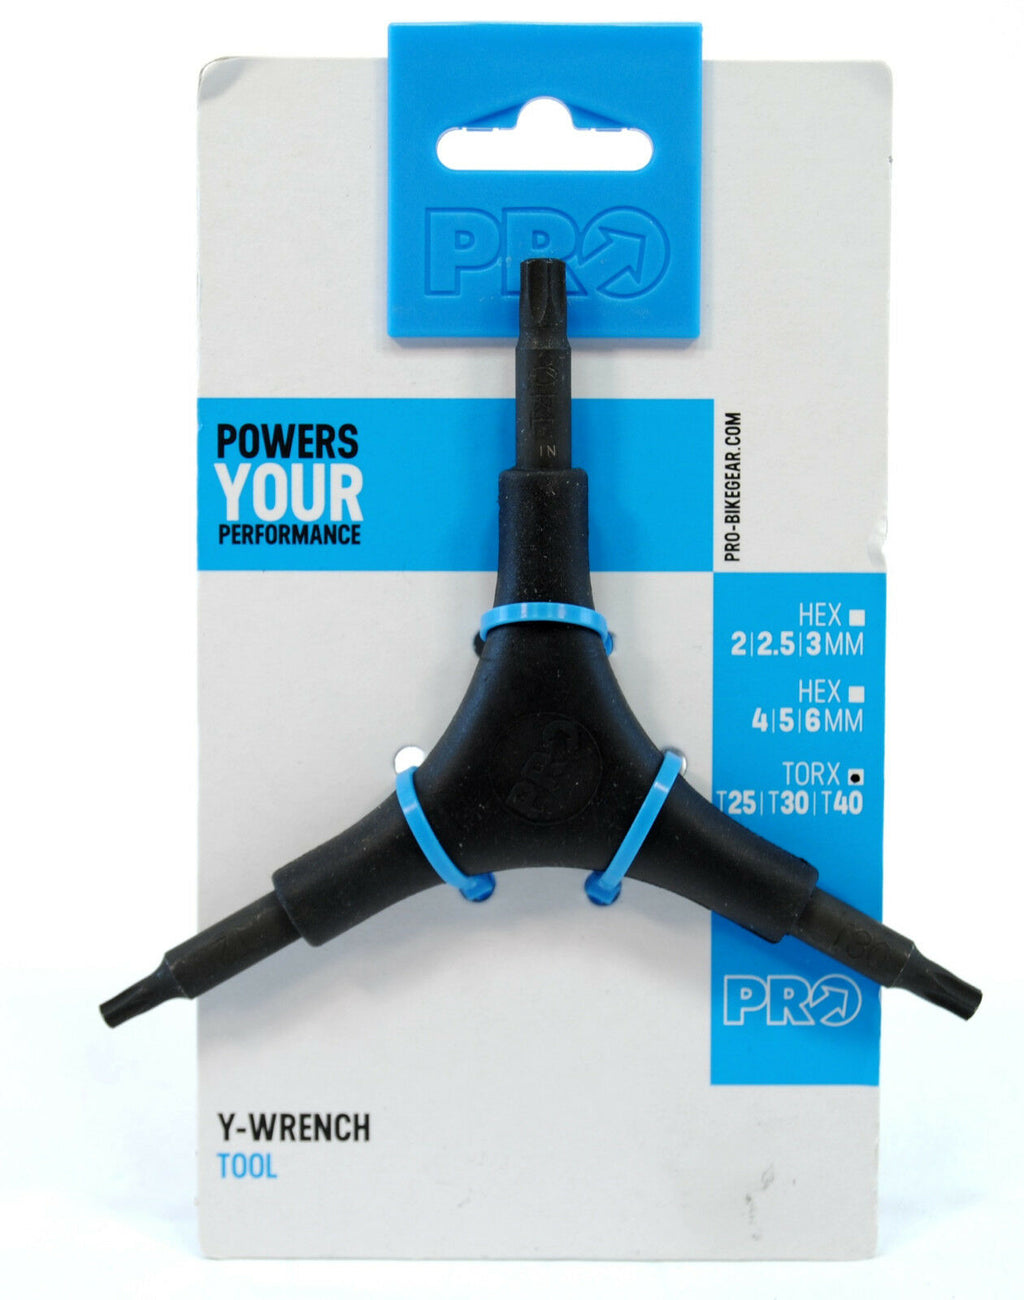 Shimano Y-Wrench Torx Tool